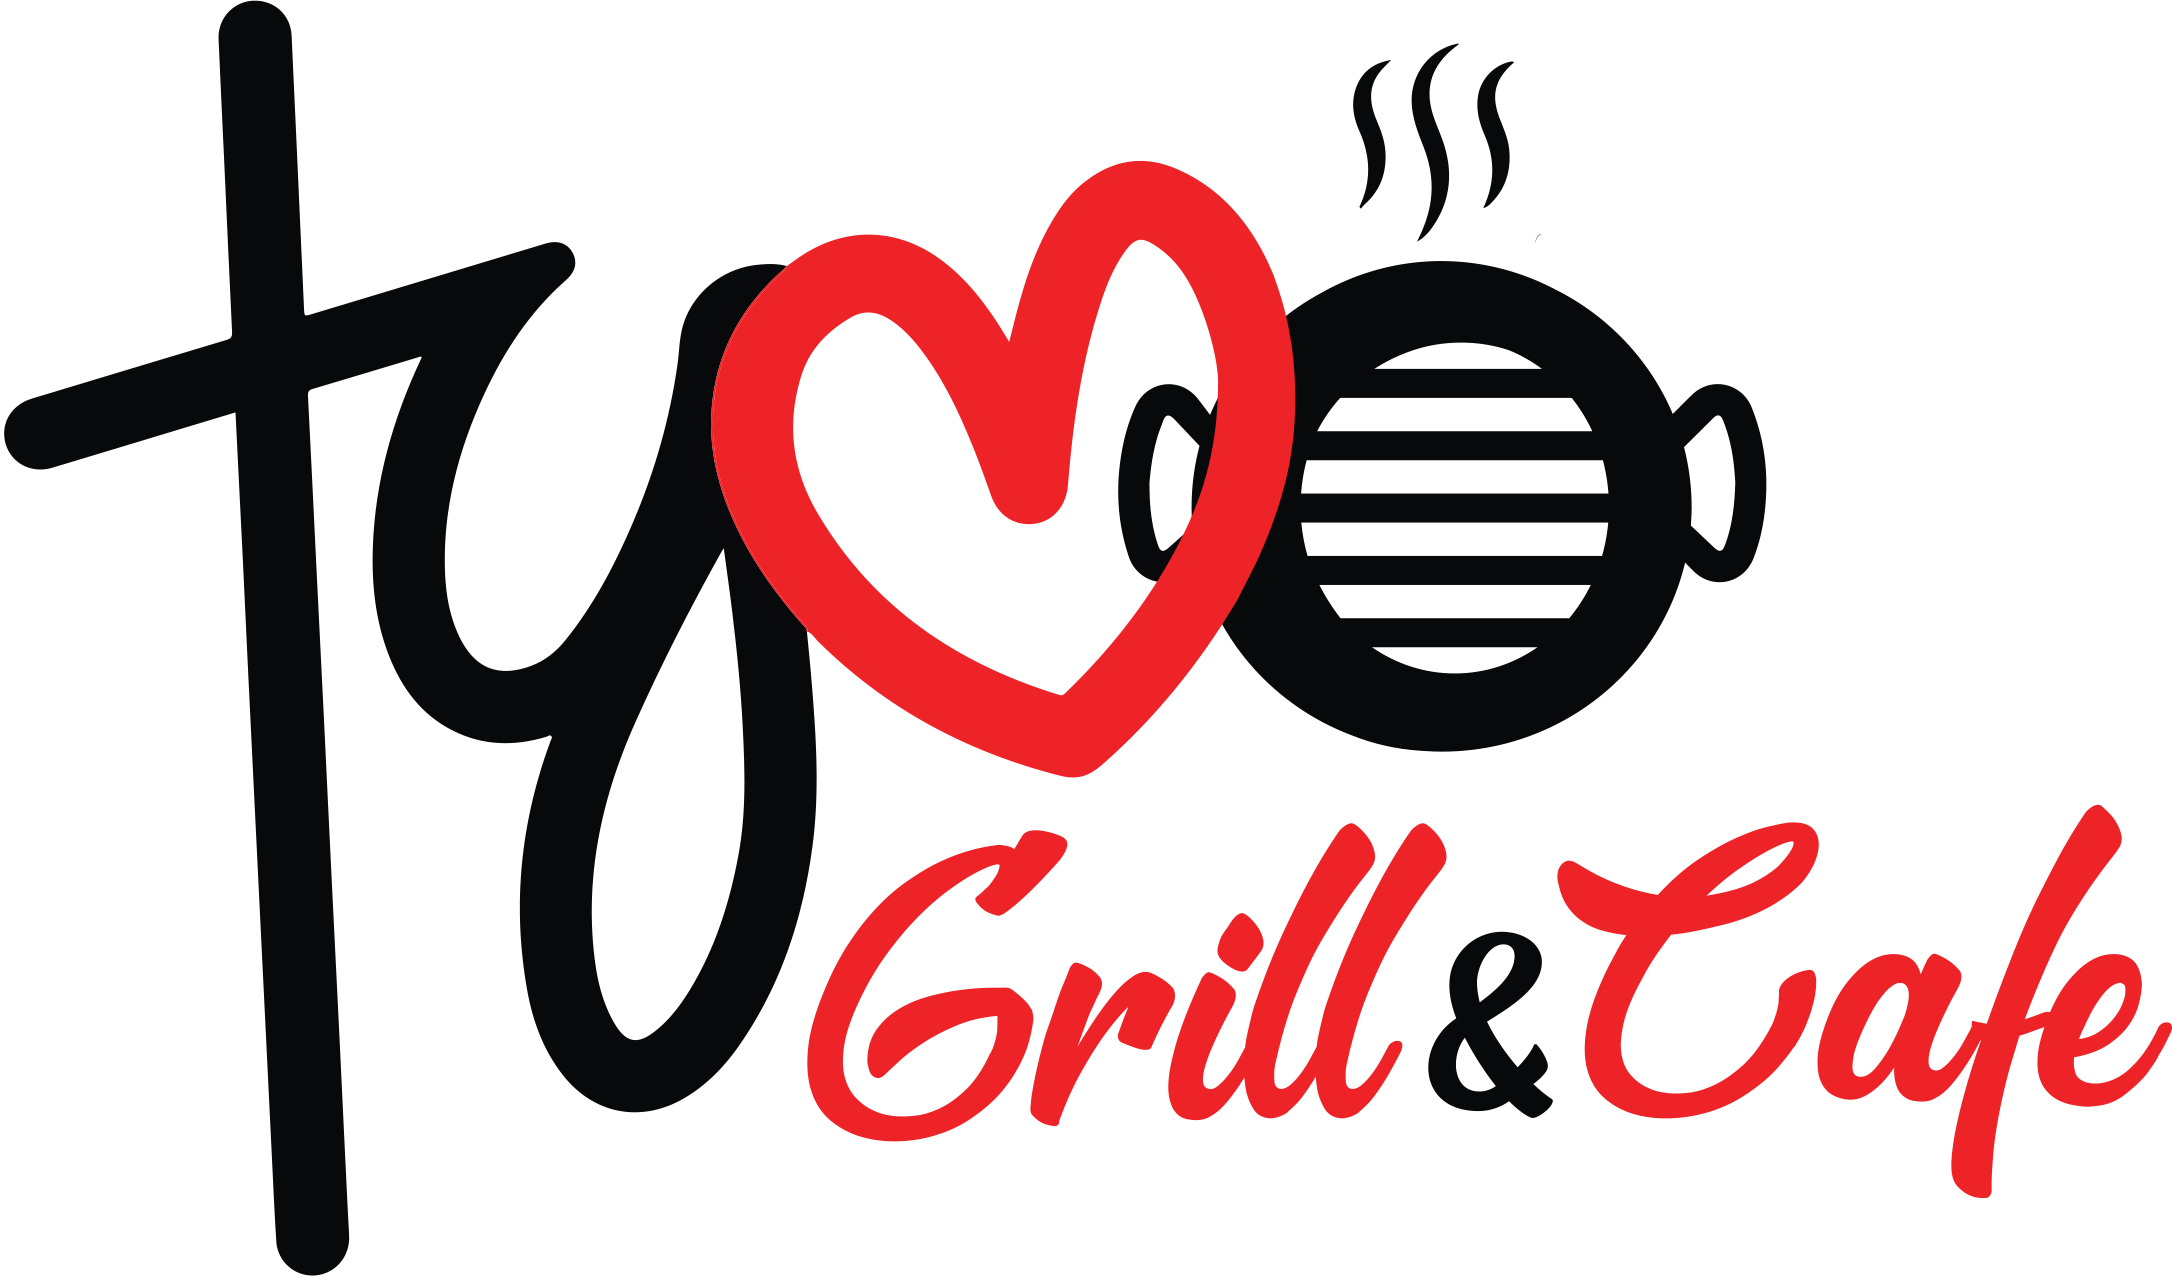 Tyvo Grill & Cafe